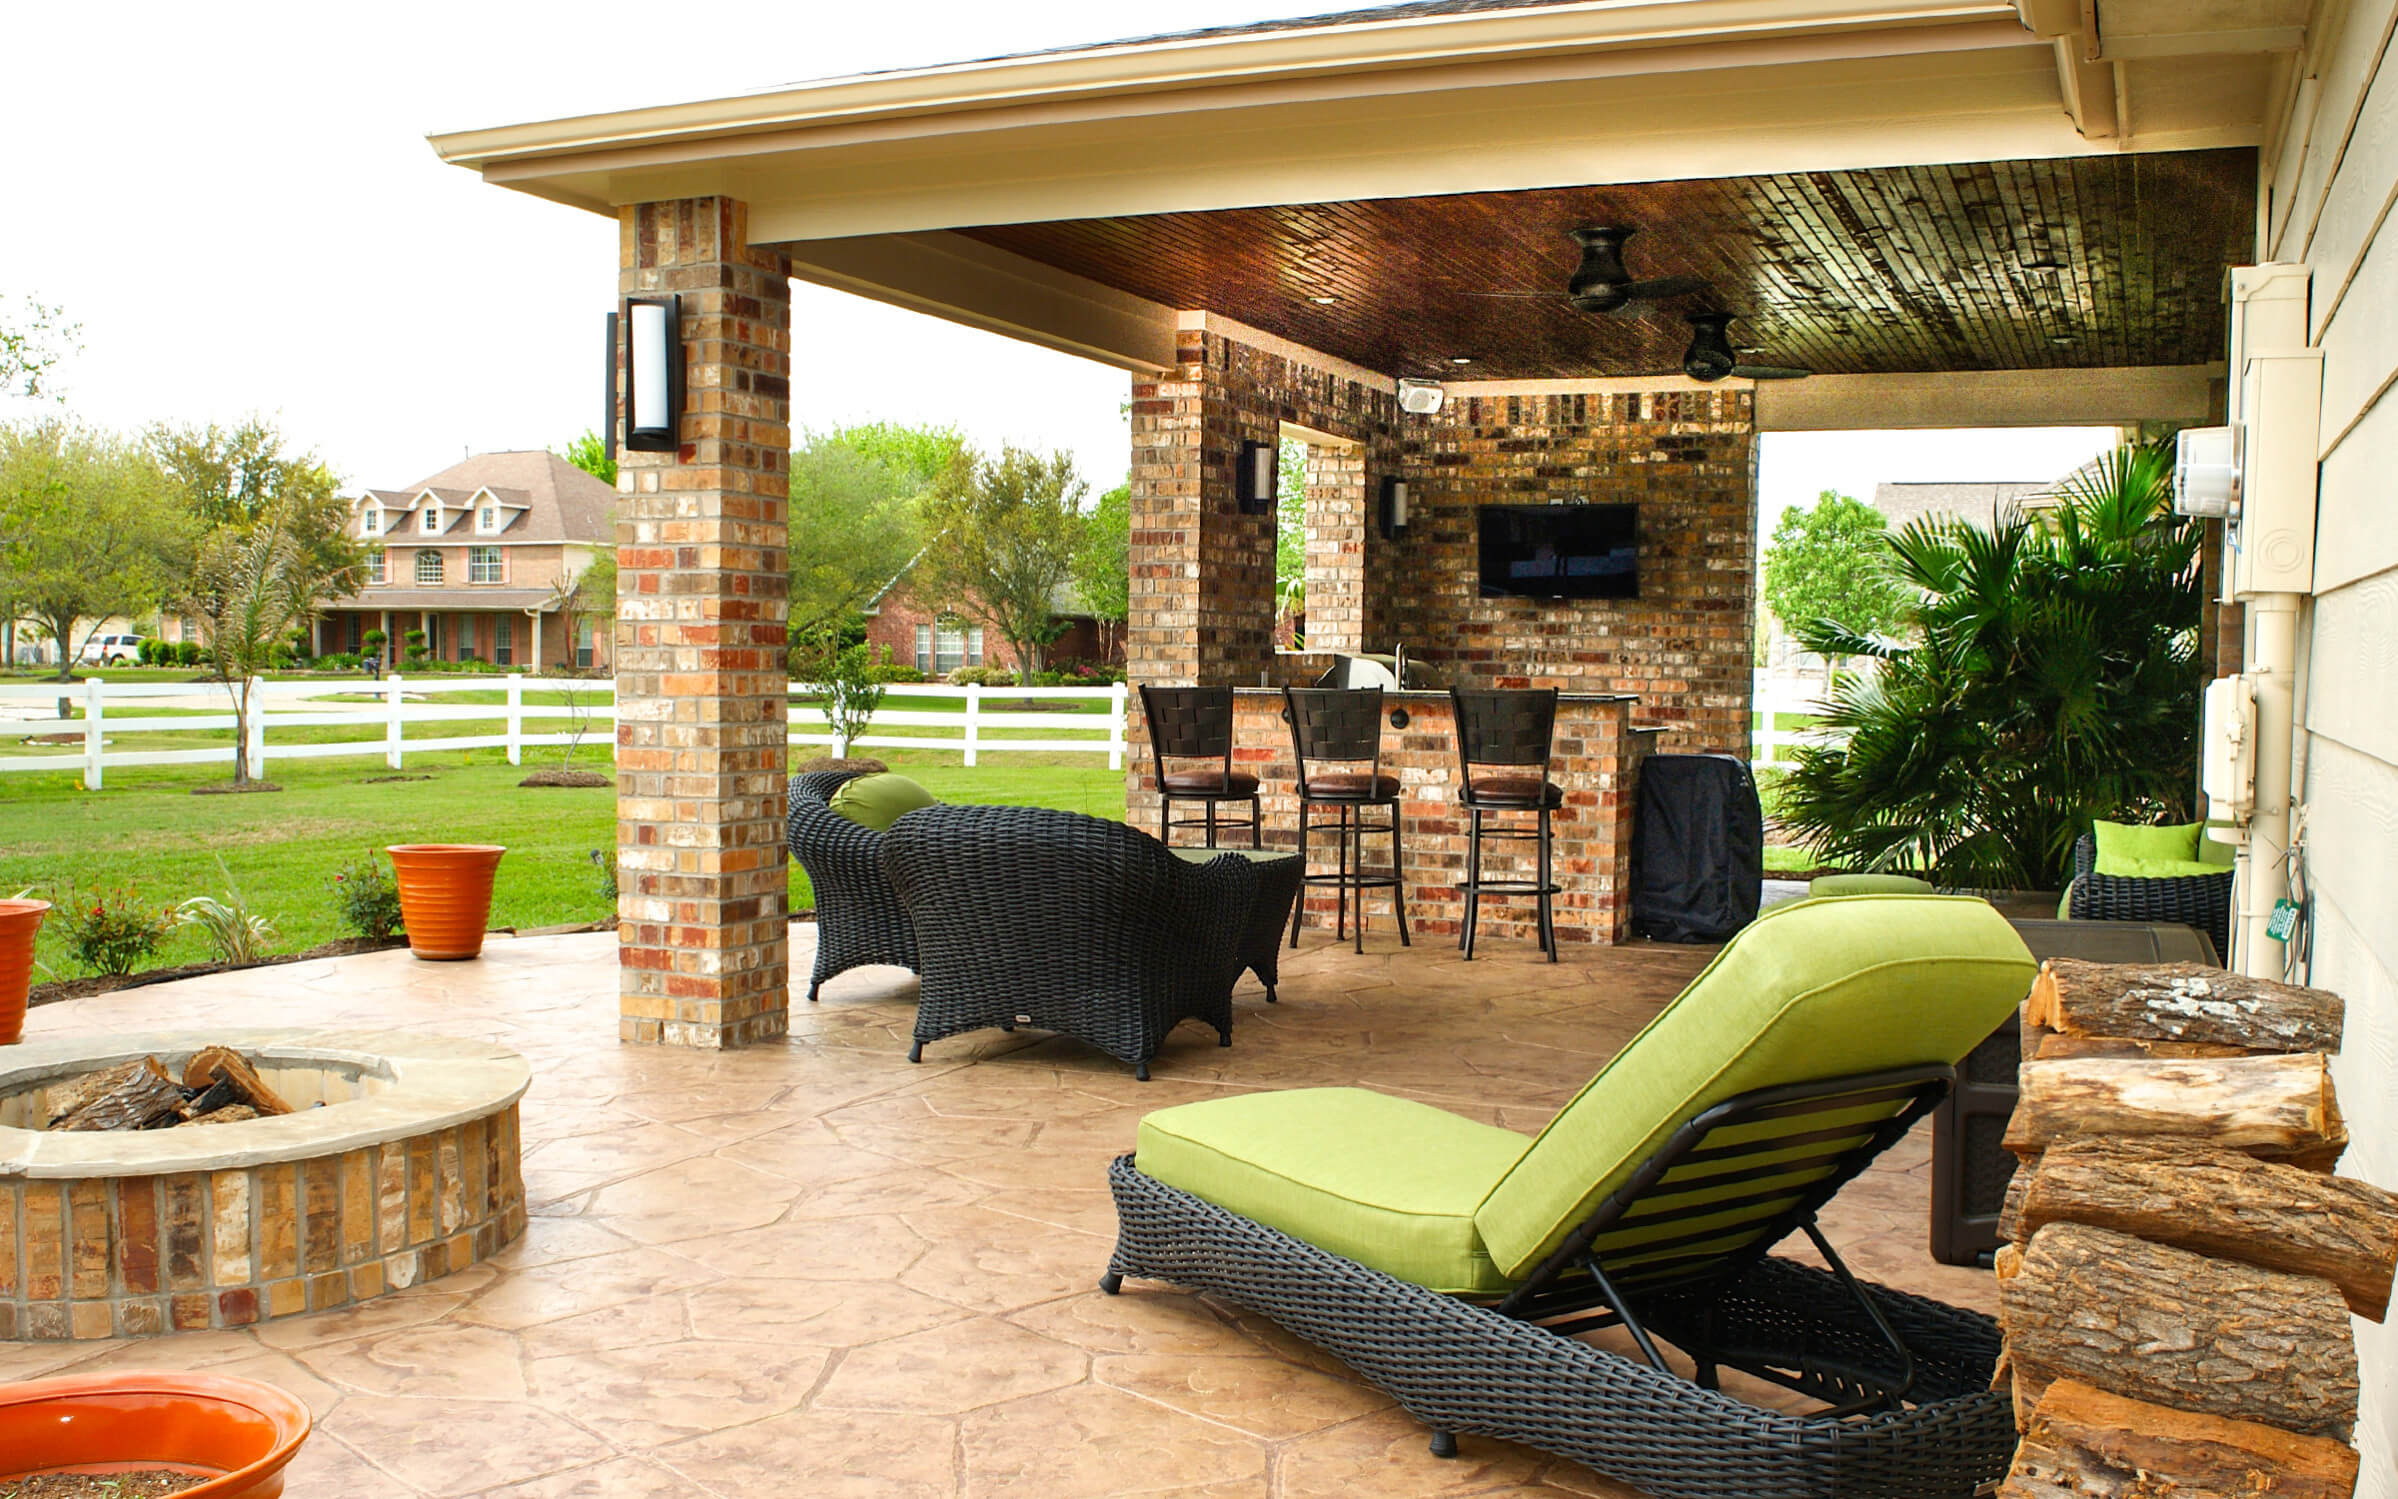 Outdoor Kitchen Covered Patio
 Patio Cover & Outdoor Kitchen in Pearland Estates Texas